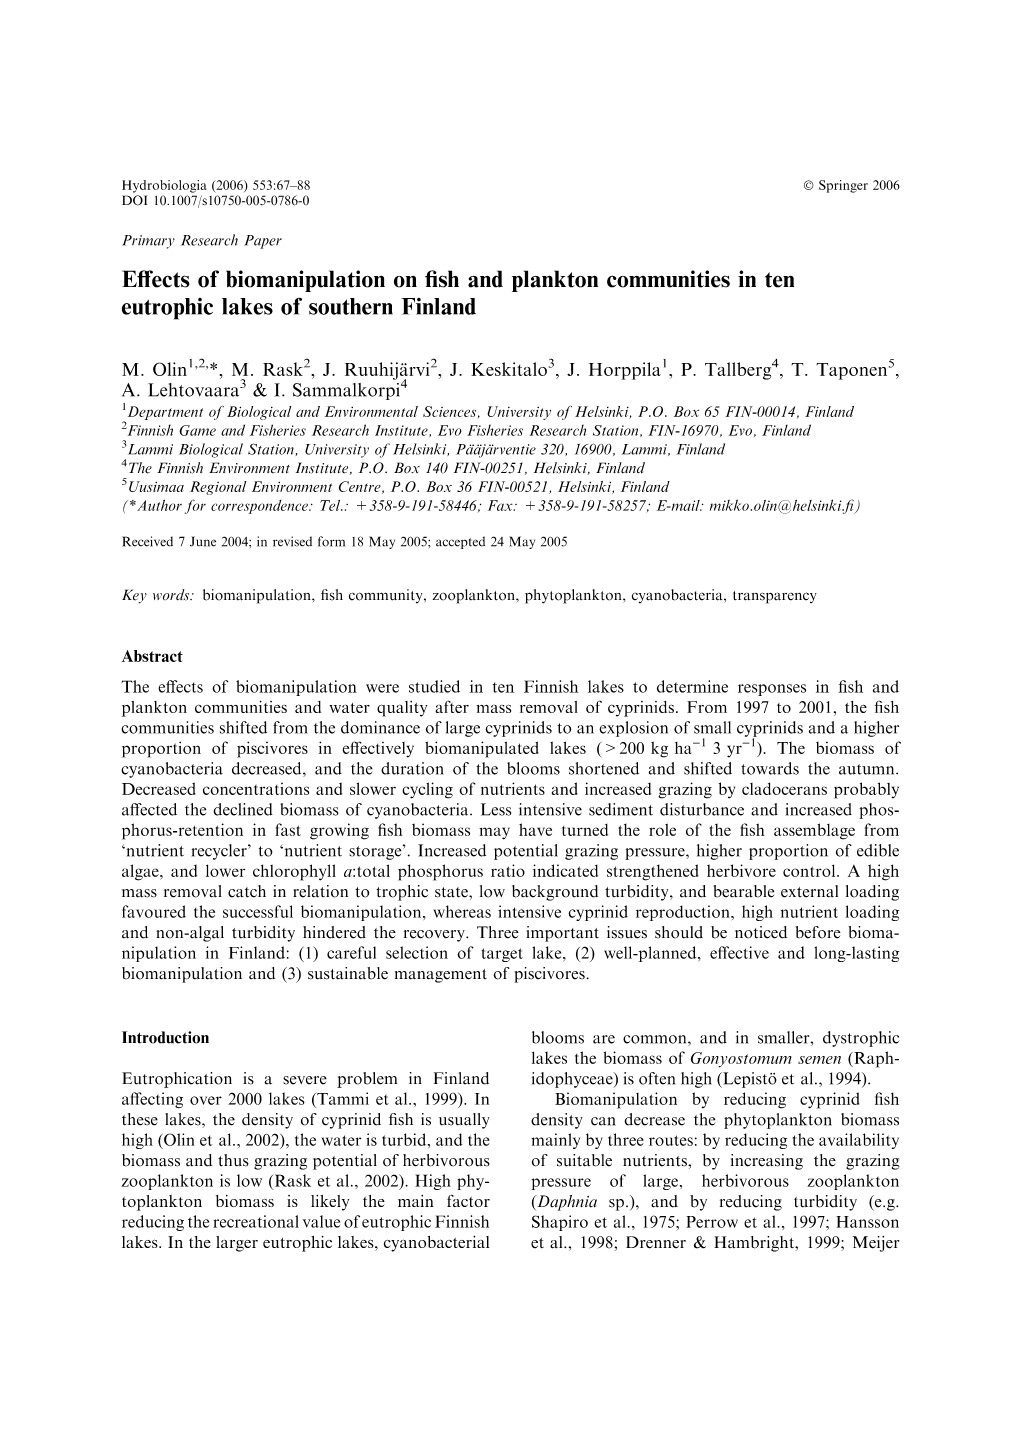 Effects of Biomanipulation on Fish and Plankton Communities in Ten